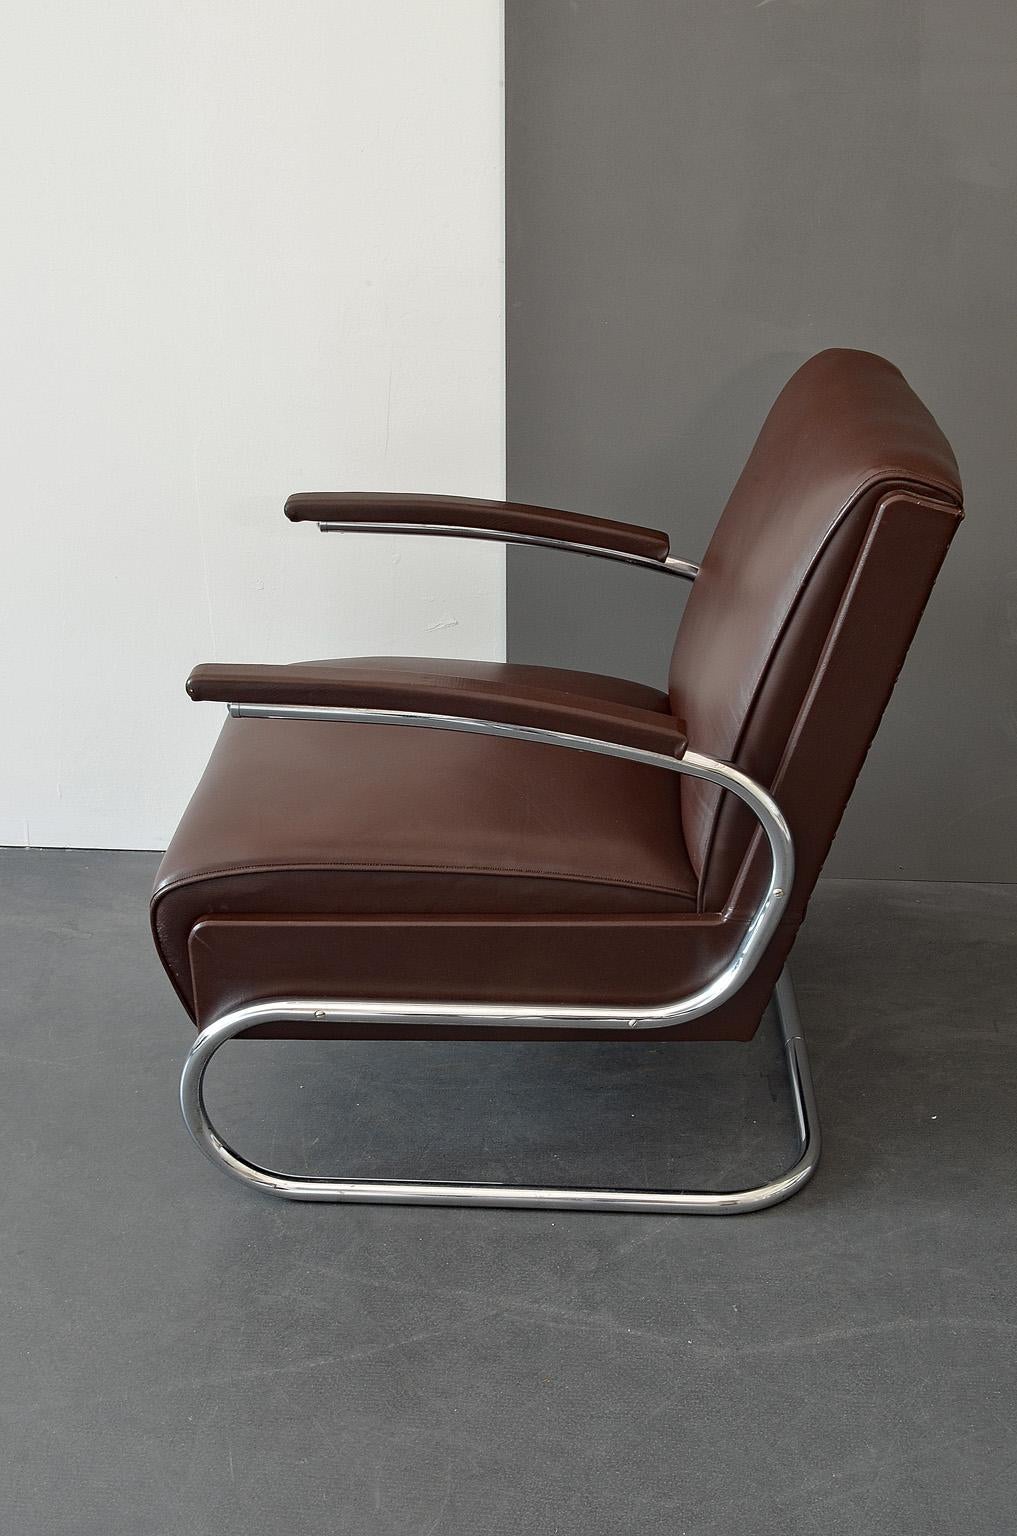 Armchair / Cantilever tubular steel brown leather from Mücke Melder, 1930s.
New leather upholstery.